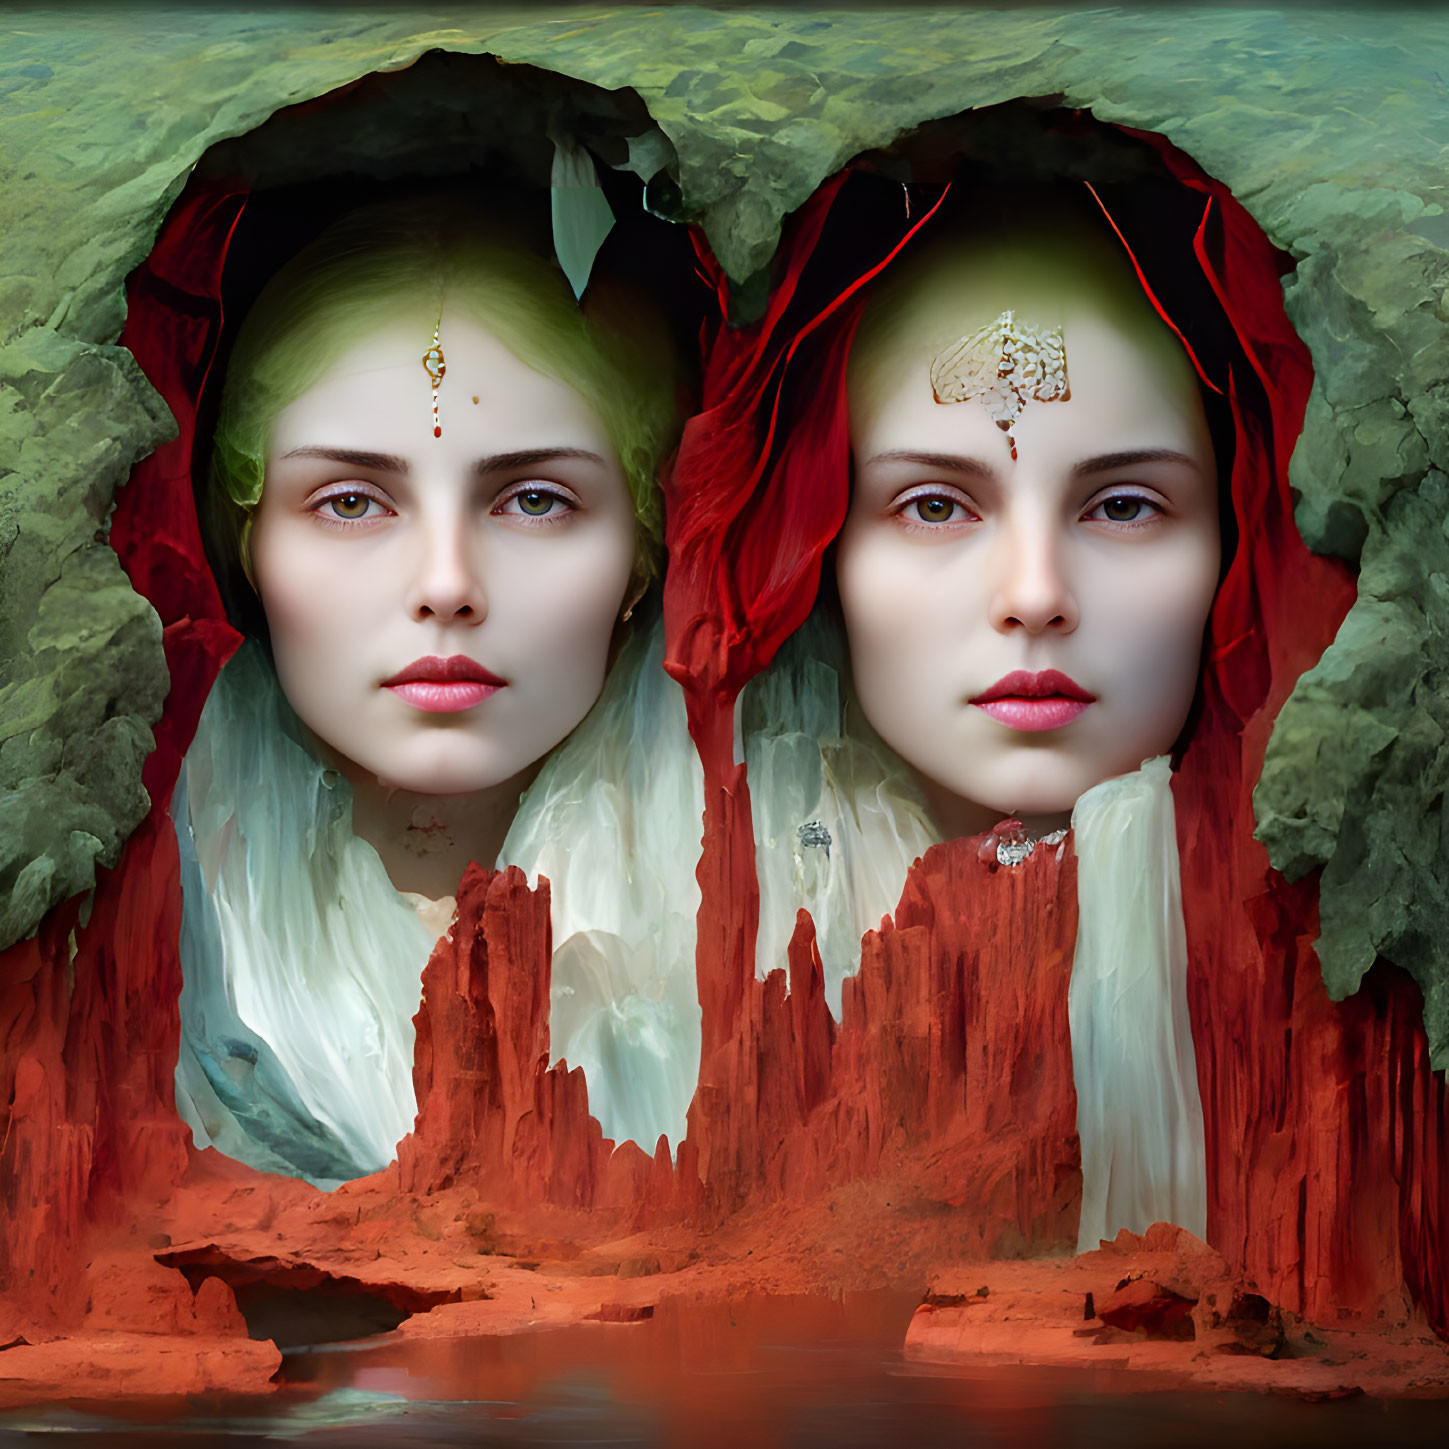 Twin female faces in surreal rocky landscape with water reflection